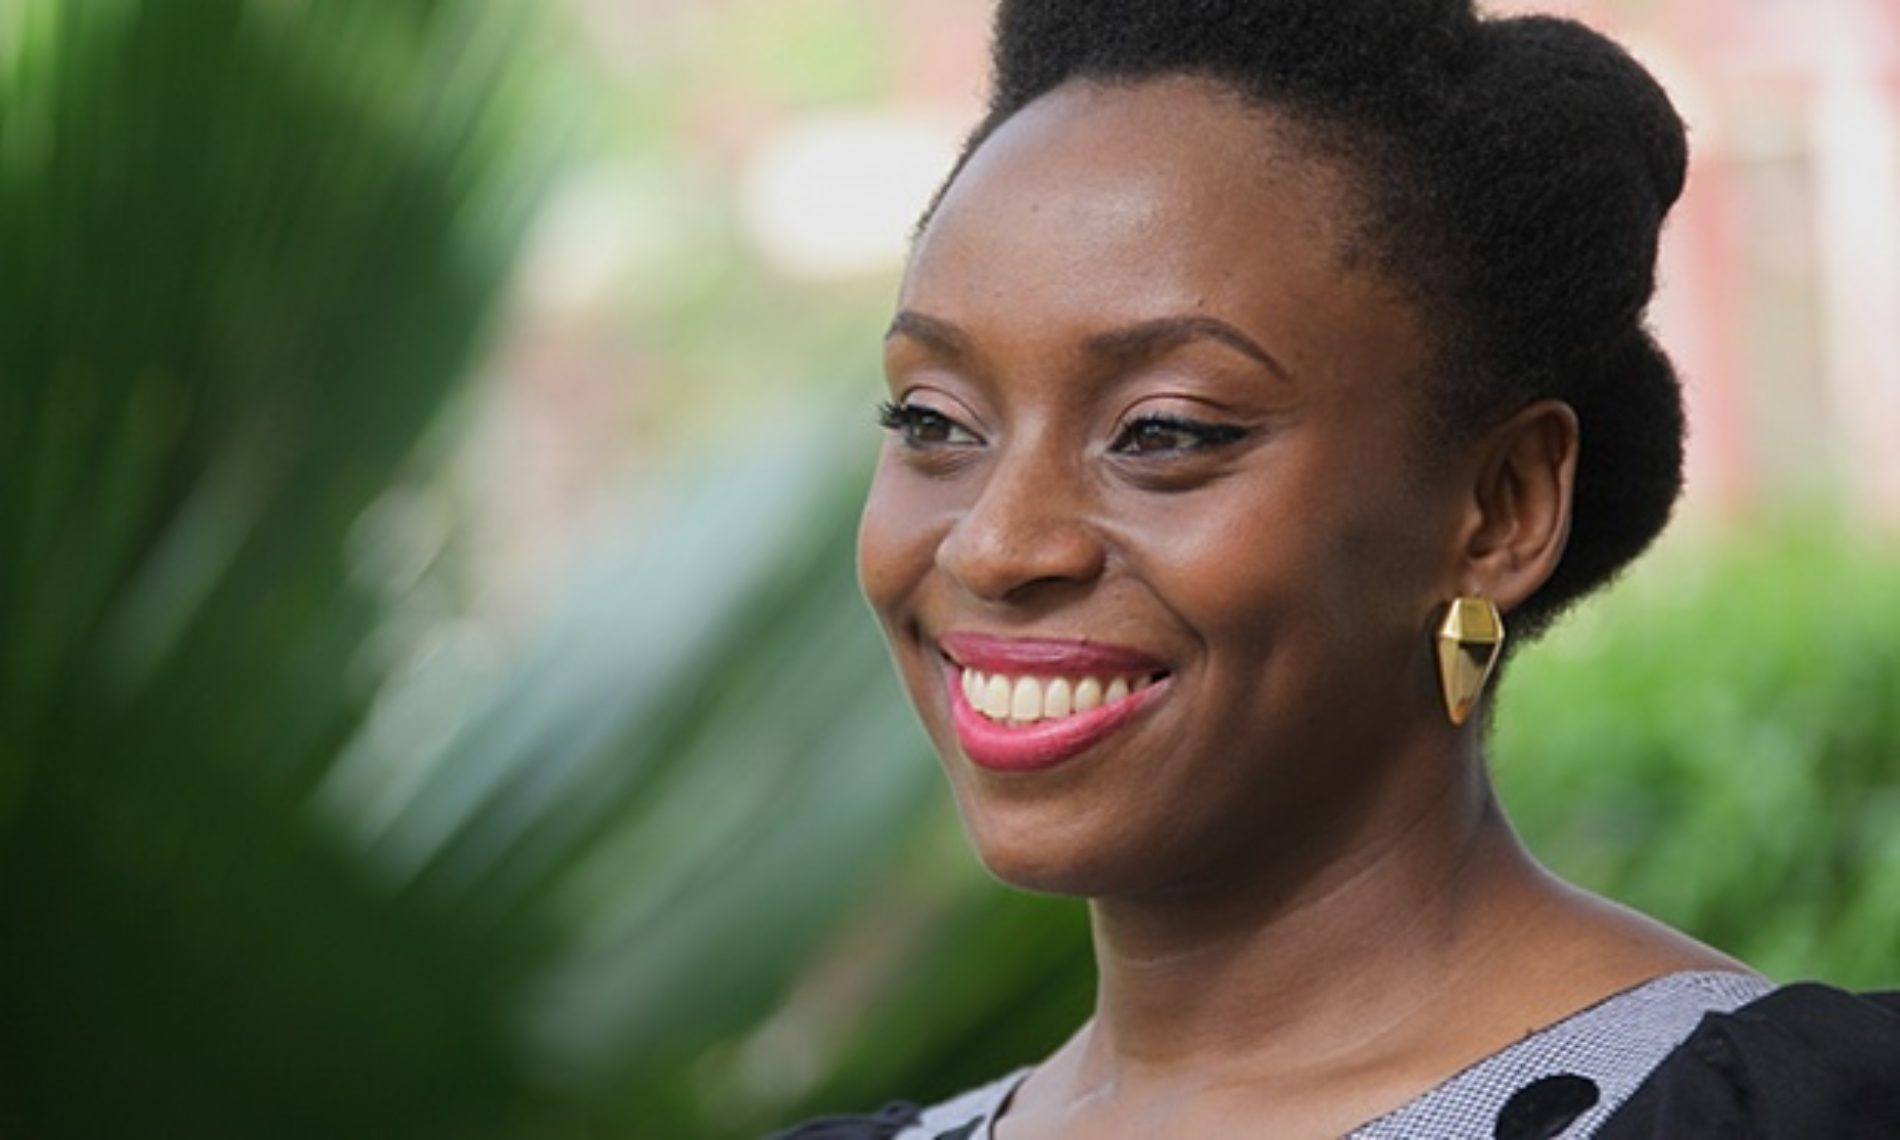 Quick Question: Where Does Chimamanda Ngozi Adichie Come From?